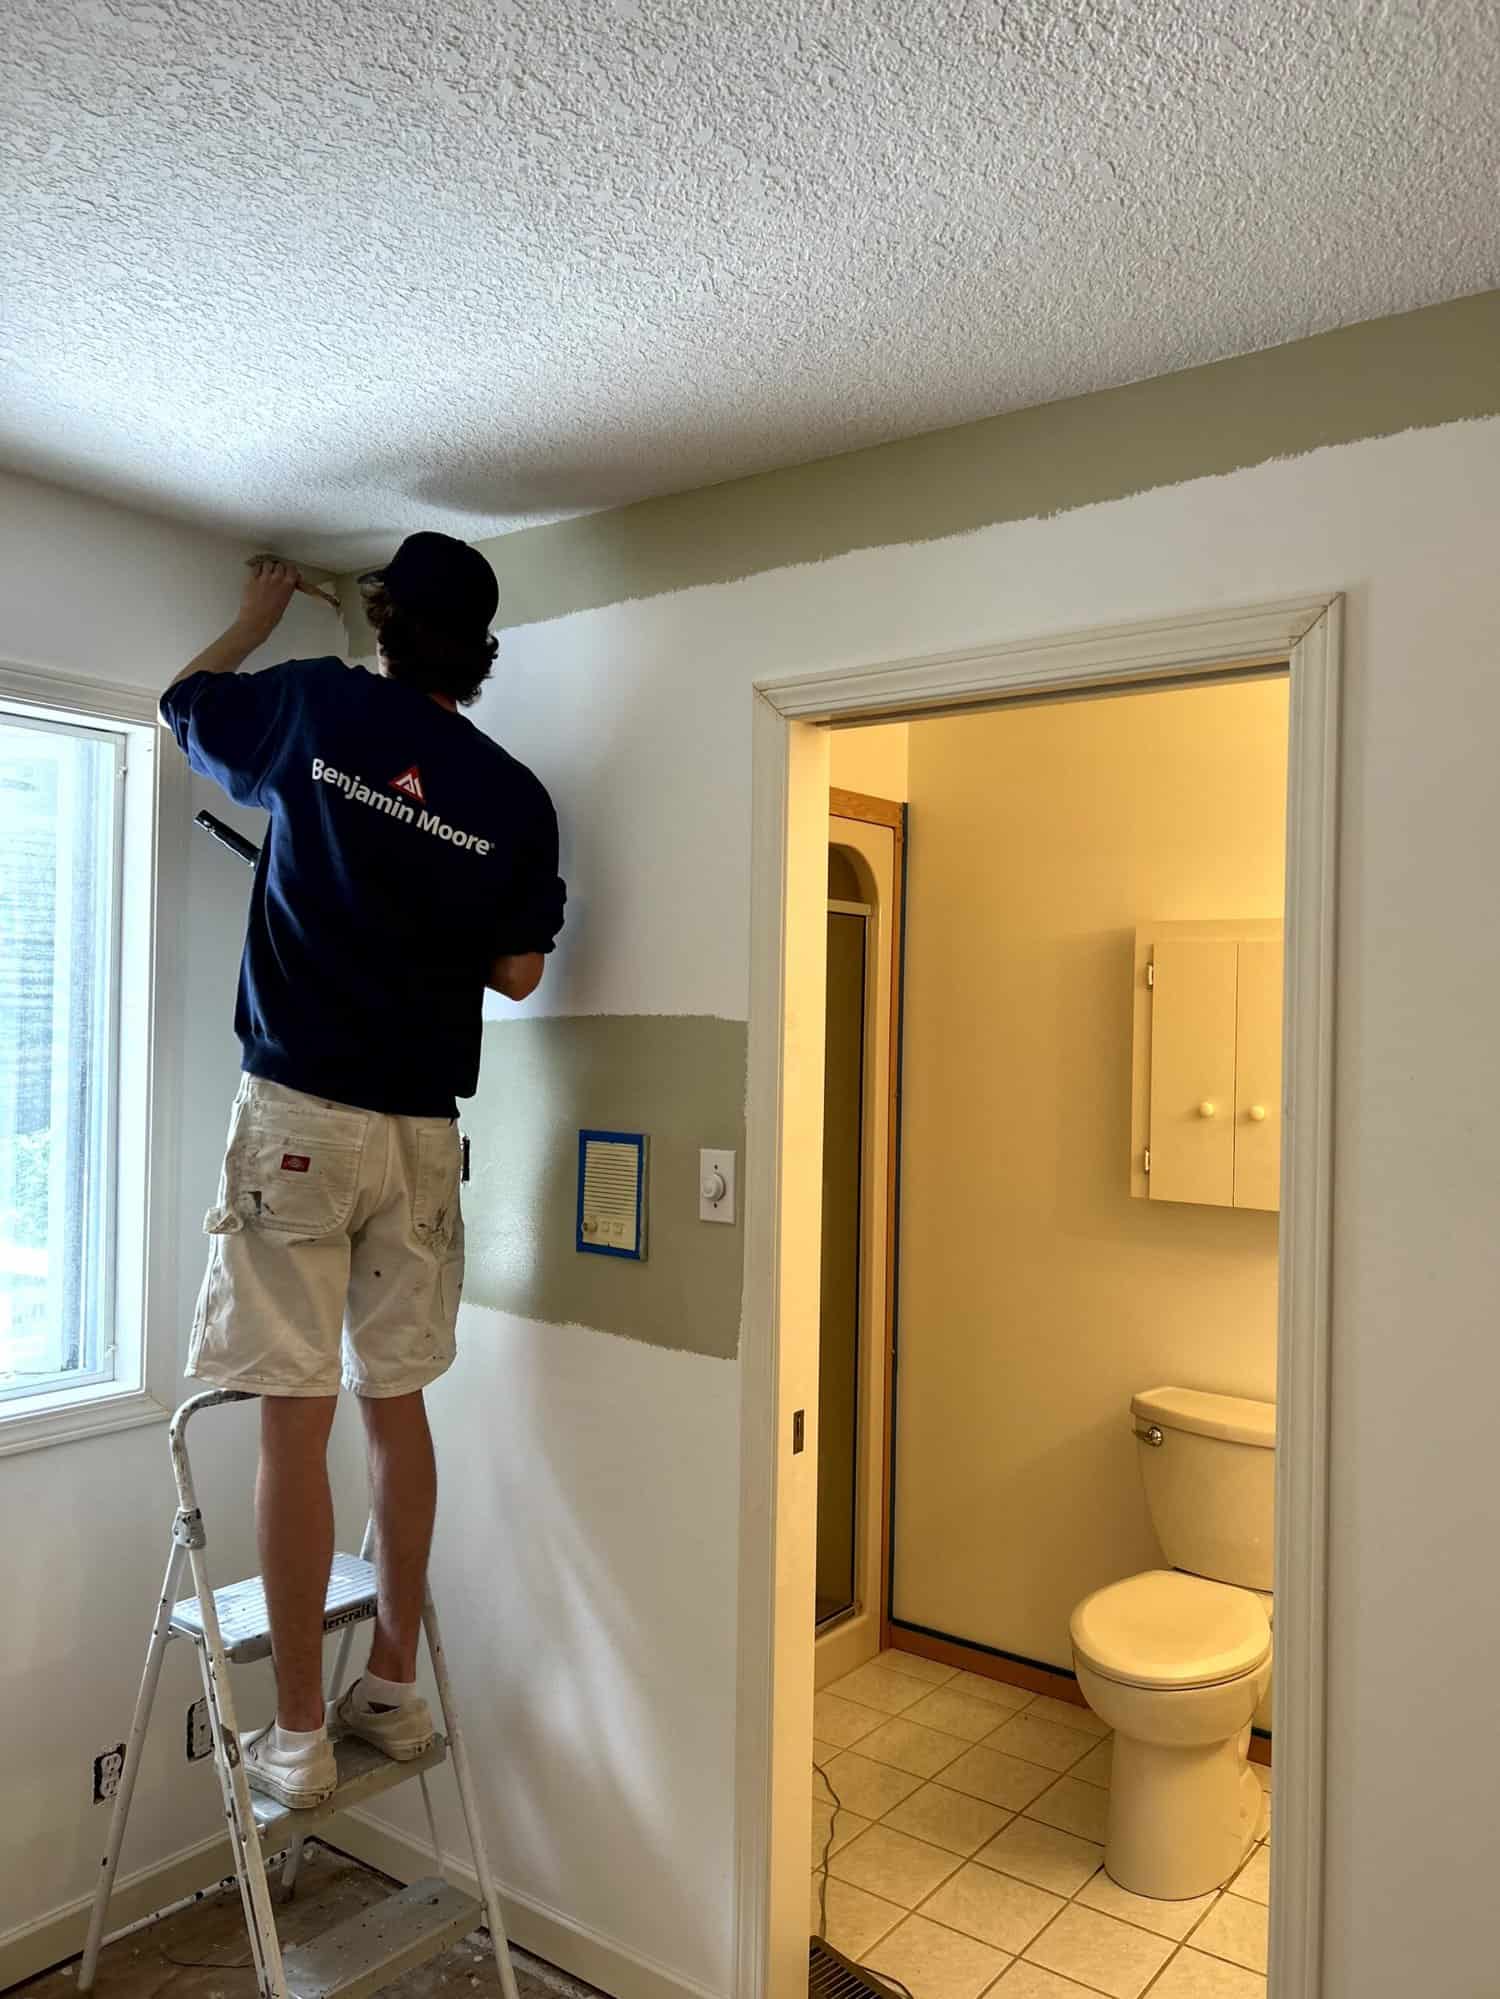 ways to protect furniture -a man on a ladder painting white on the wall